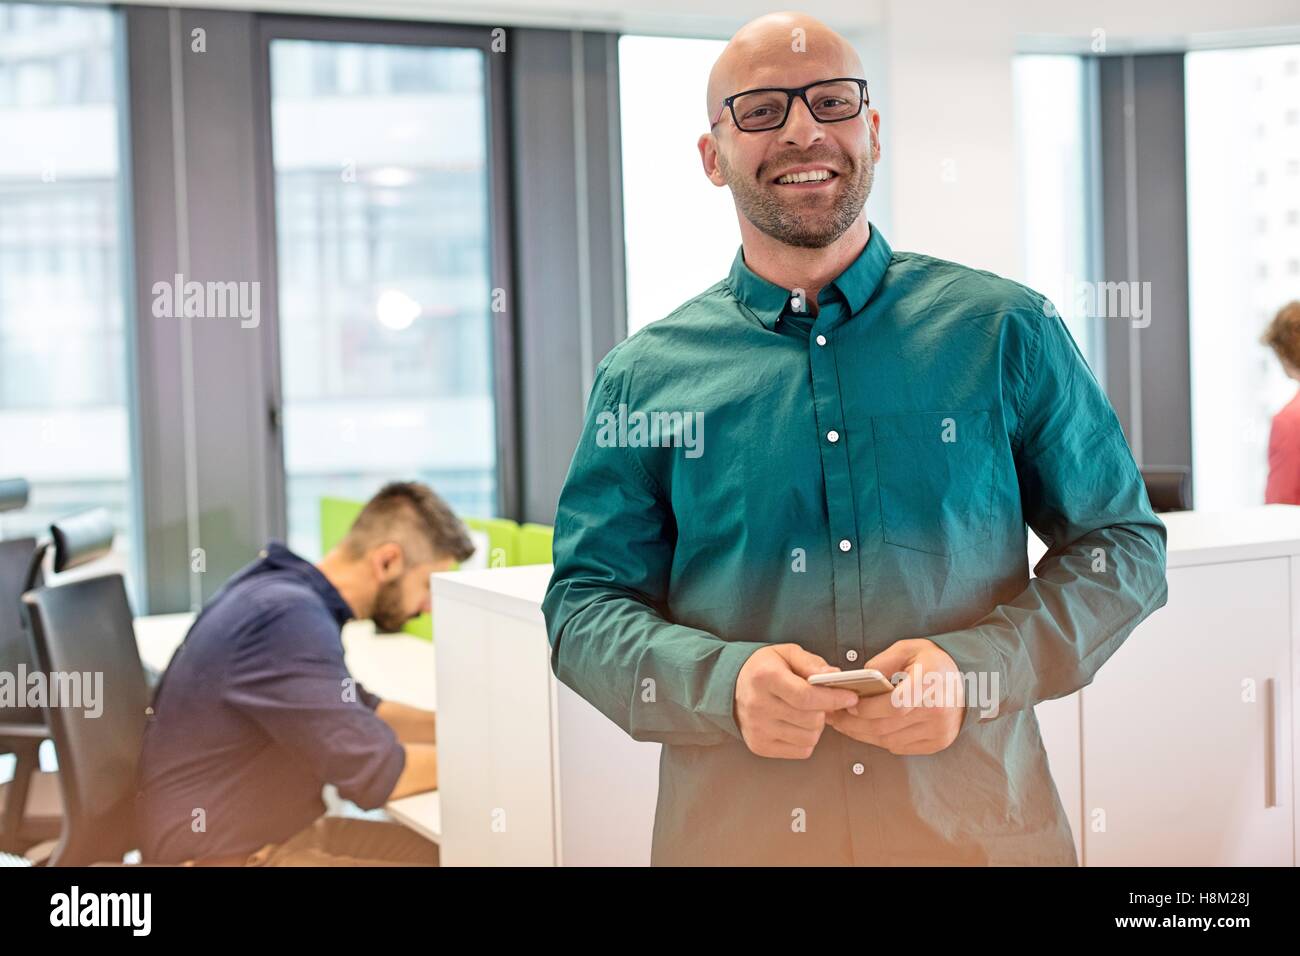 Portrait of Mid adult businessman smiling with colleague in office Banque D'Images